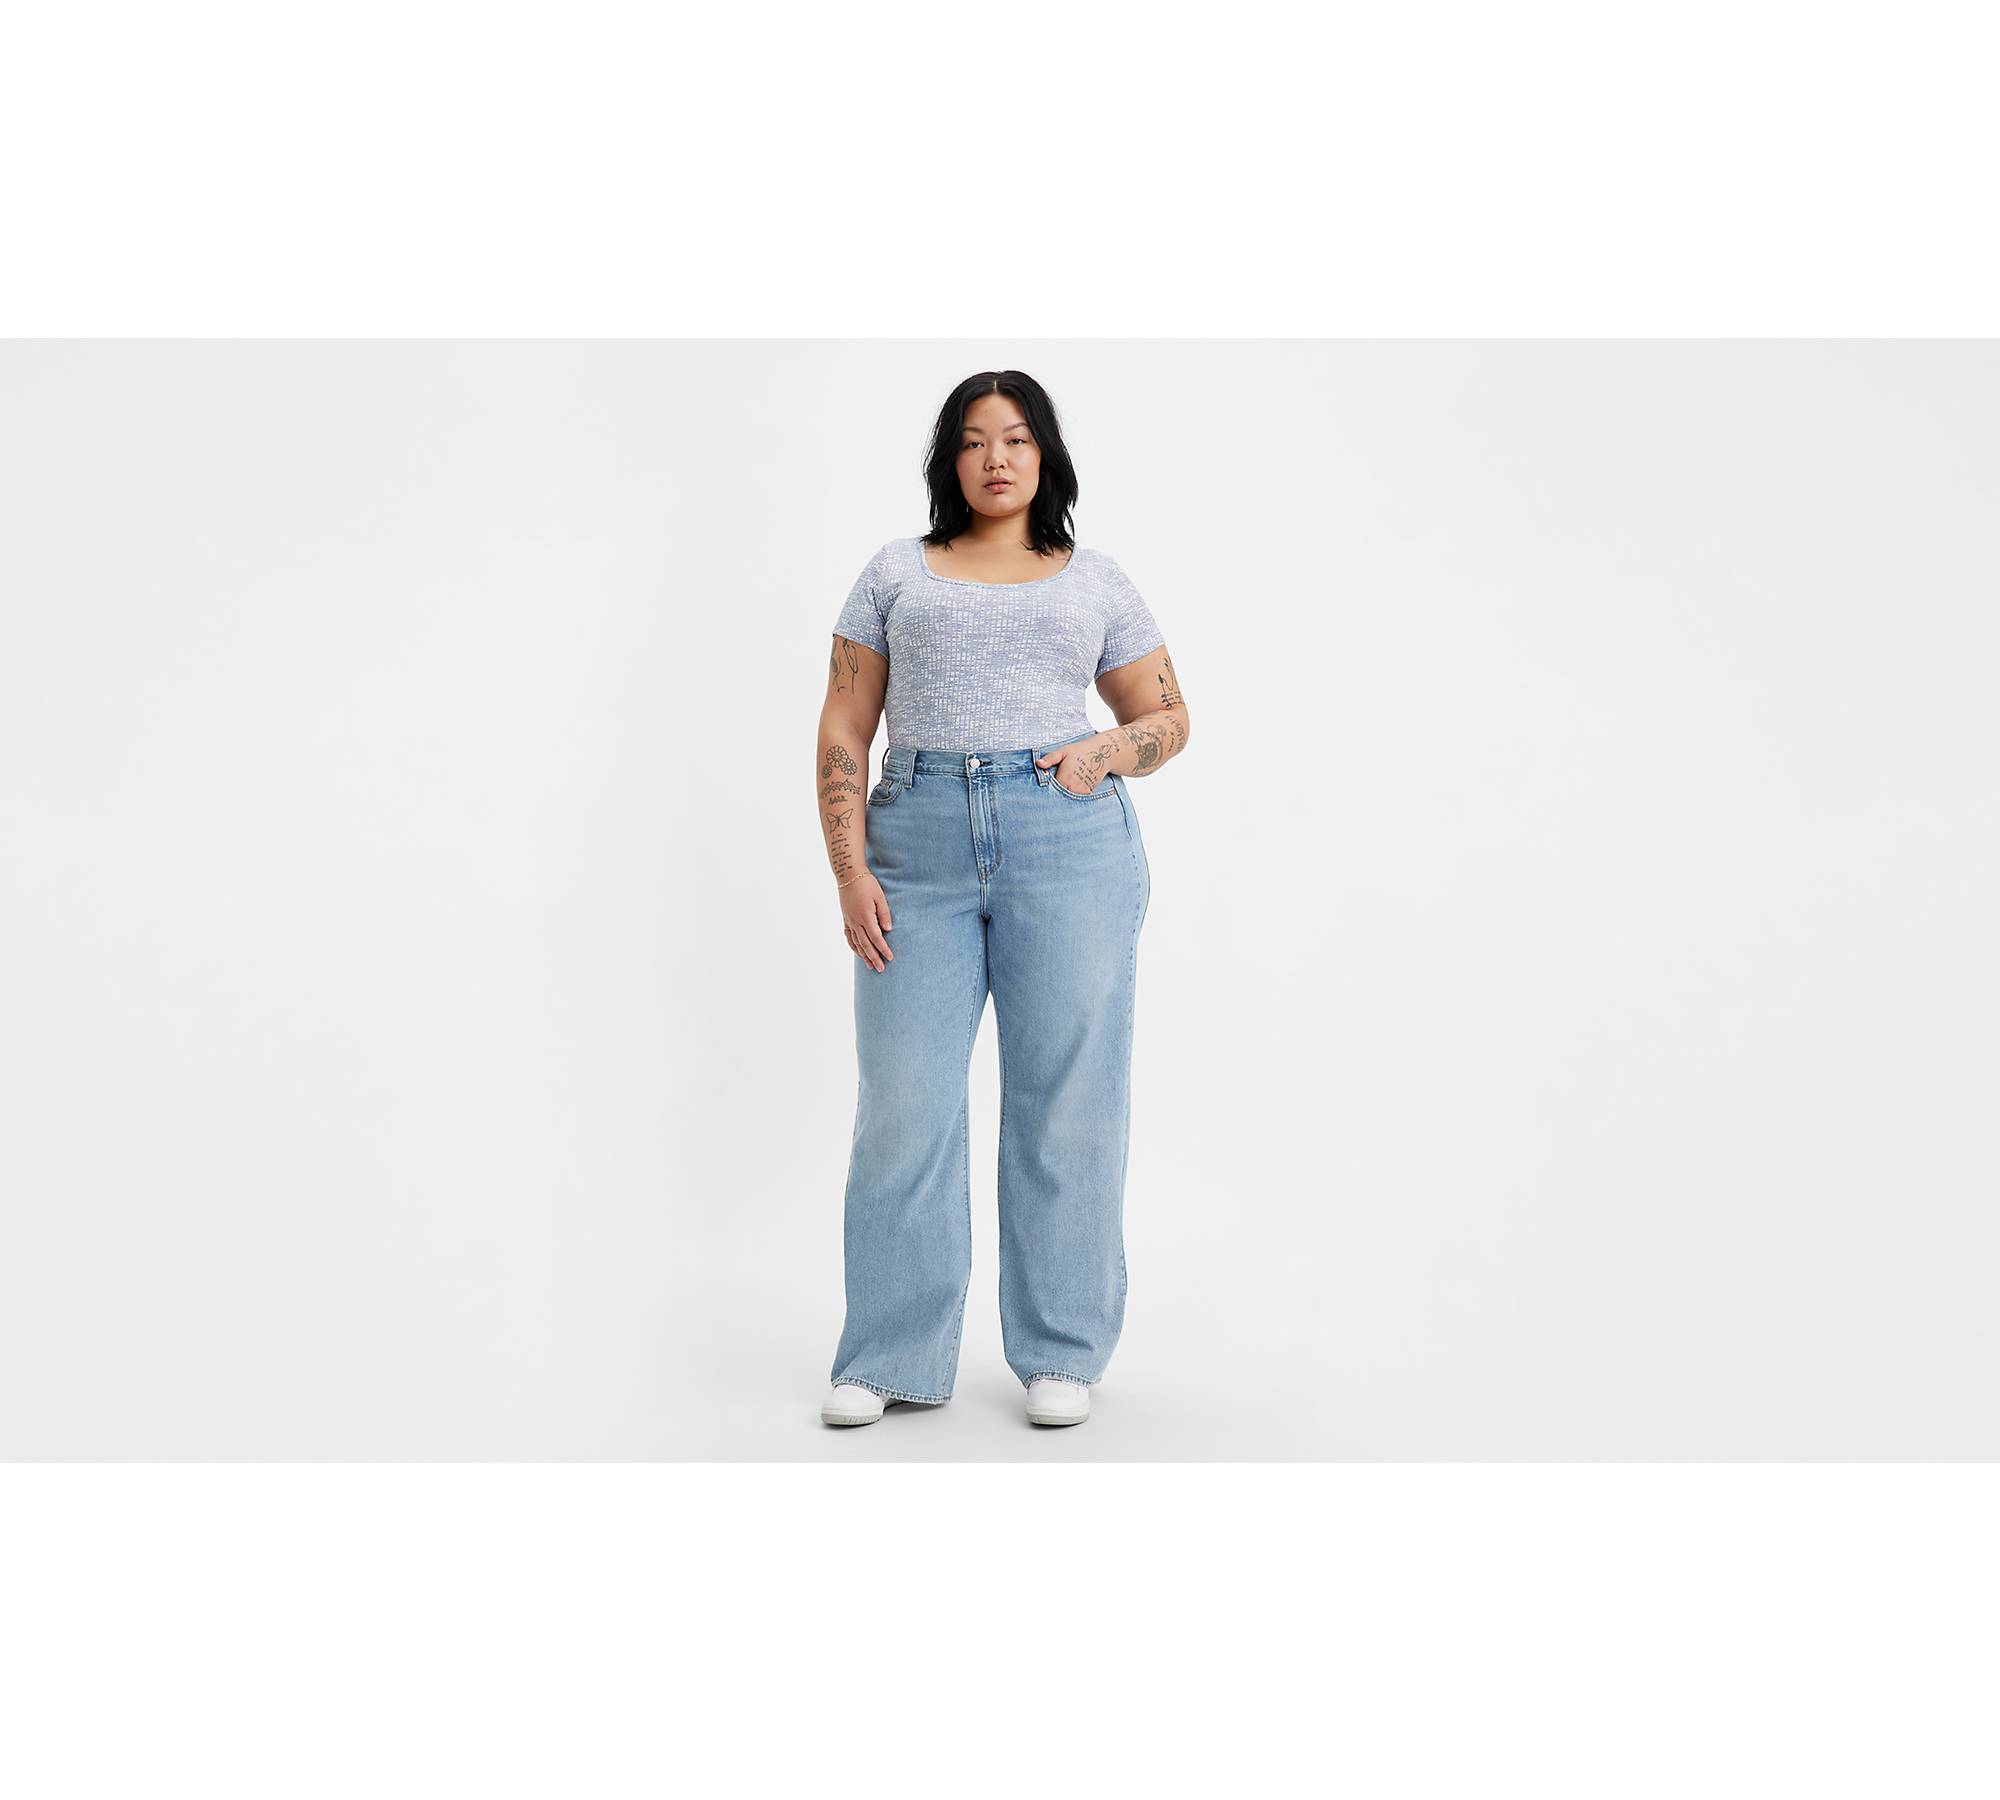 TALL PLUS SIZE 12 Jeans Haul - Pretty Little Thing 